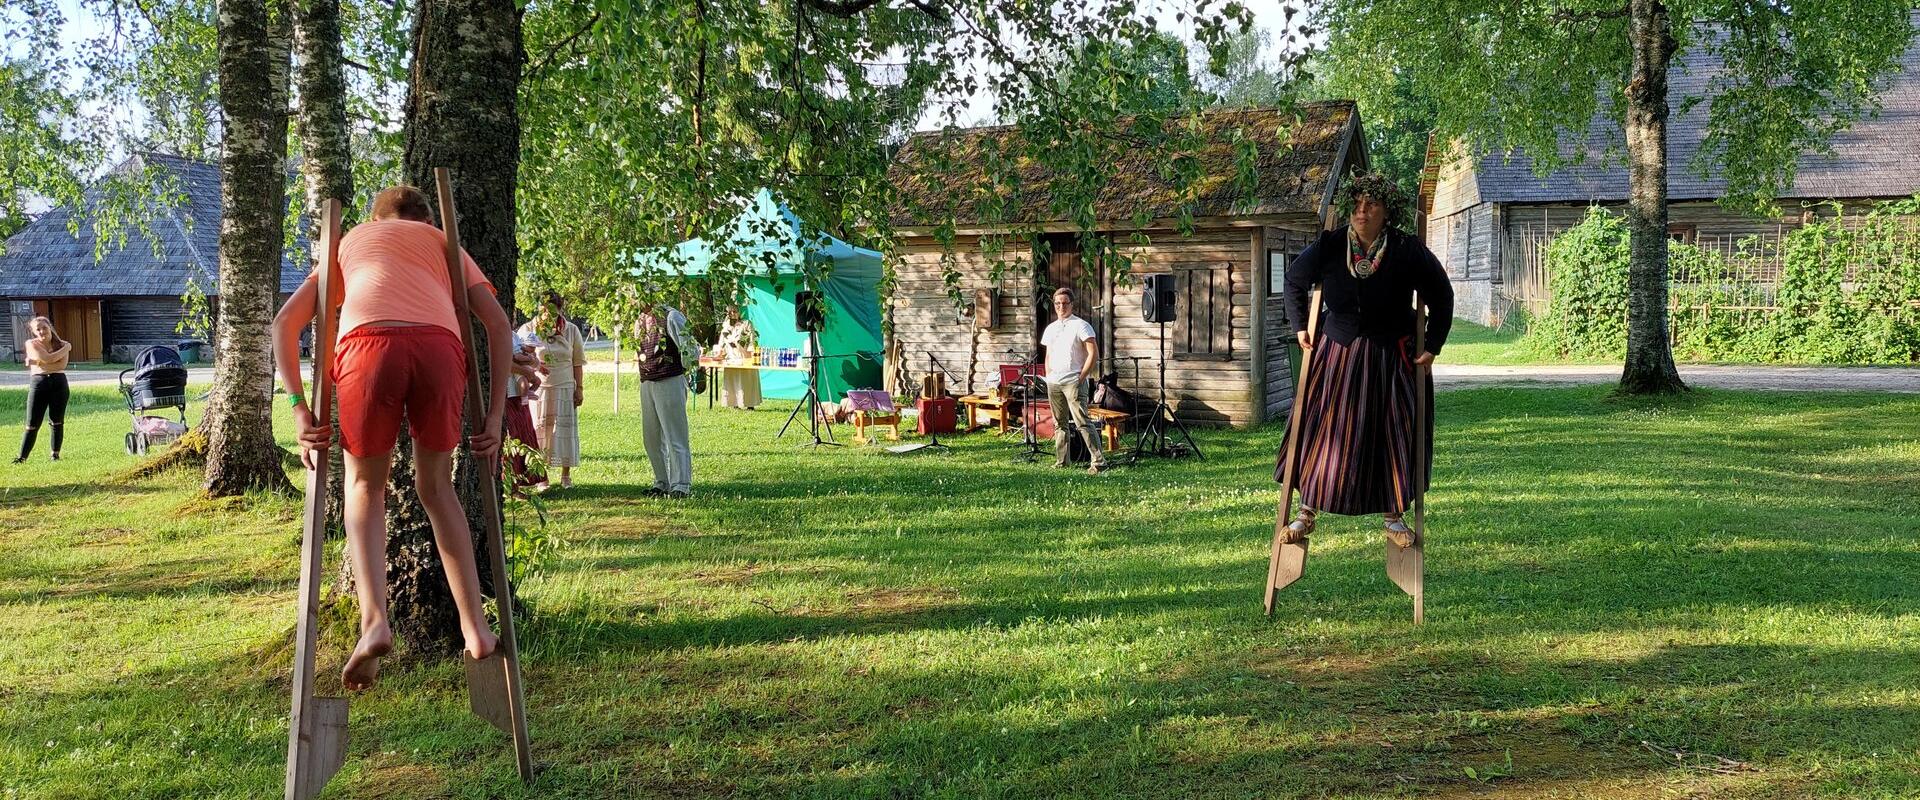 National Midsummer Evening at the Farm Museum of C.R. Jakobson